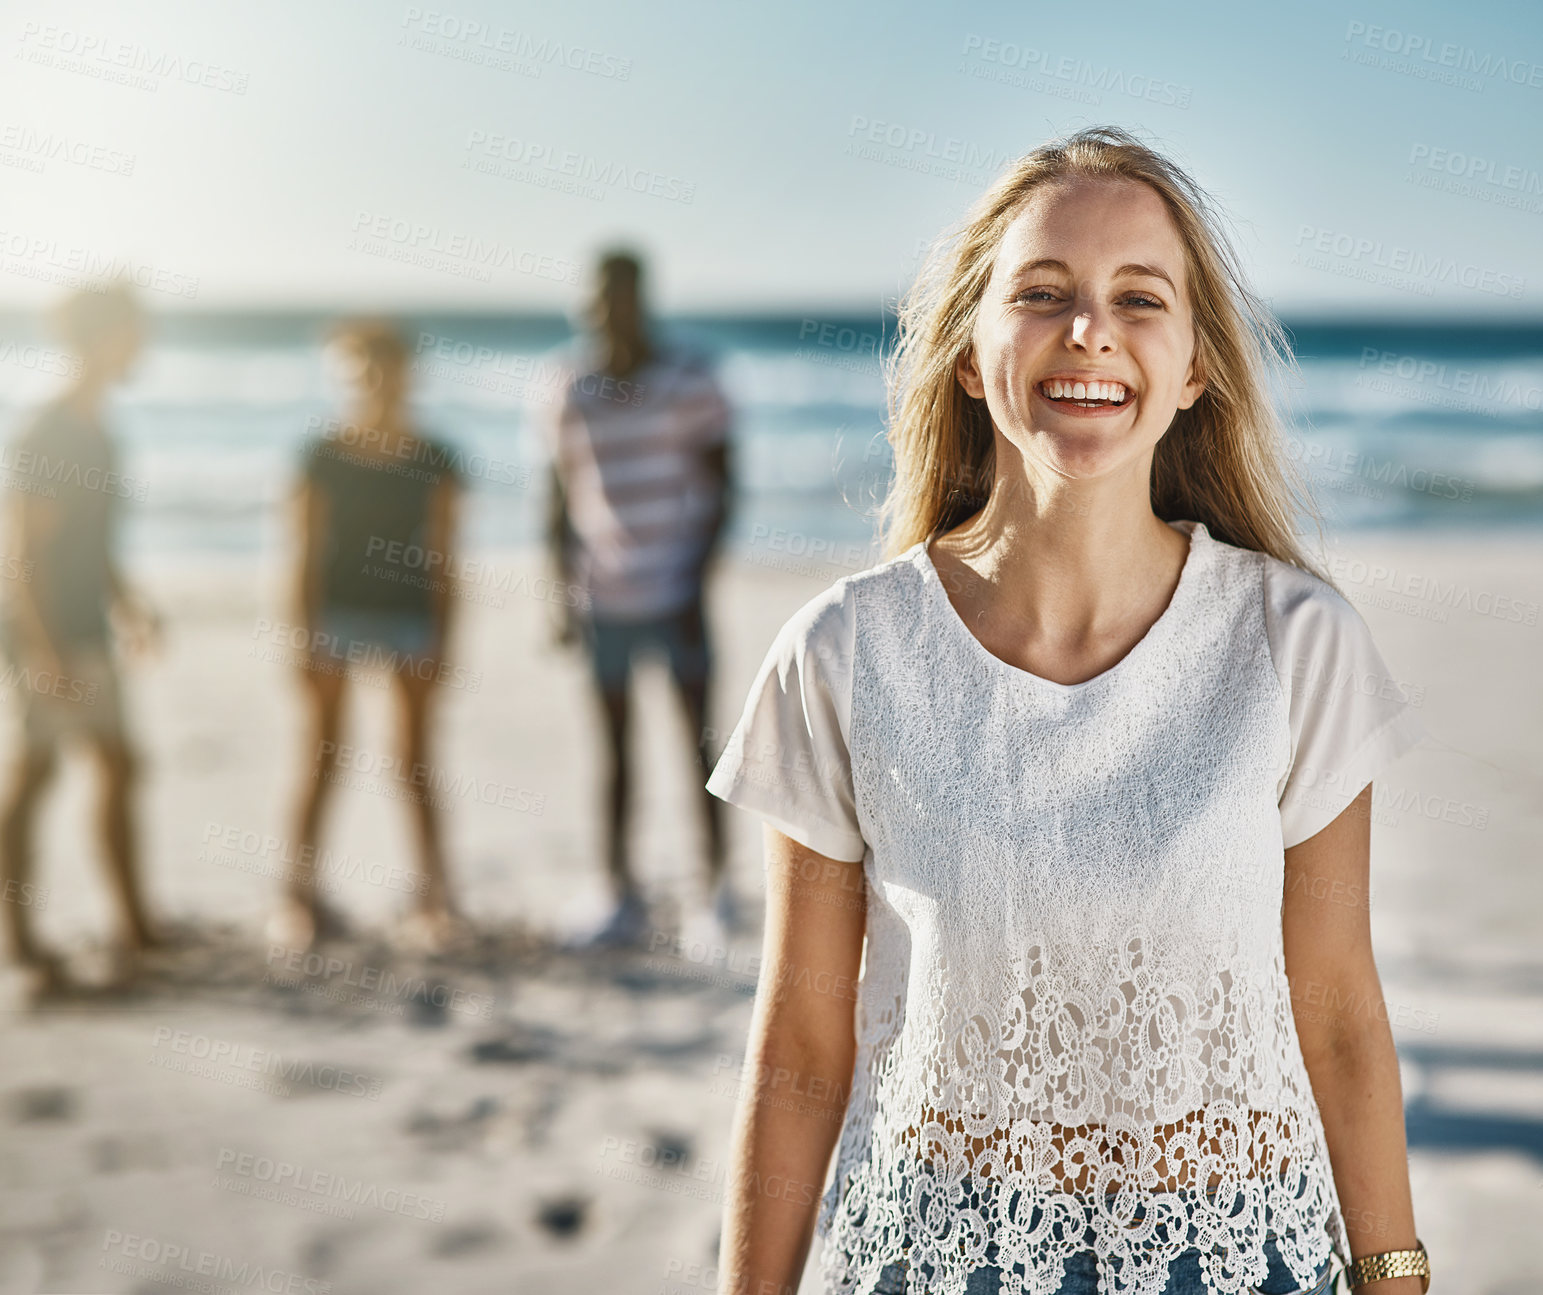 Buy stock photo Portrait of a happy young woman posing on the beach with her friends in the background